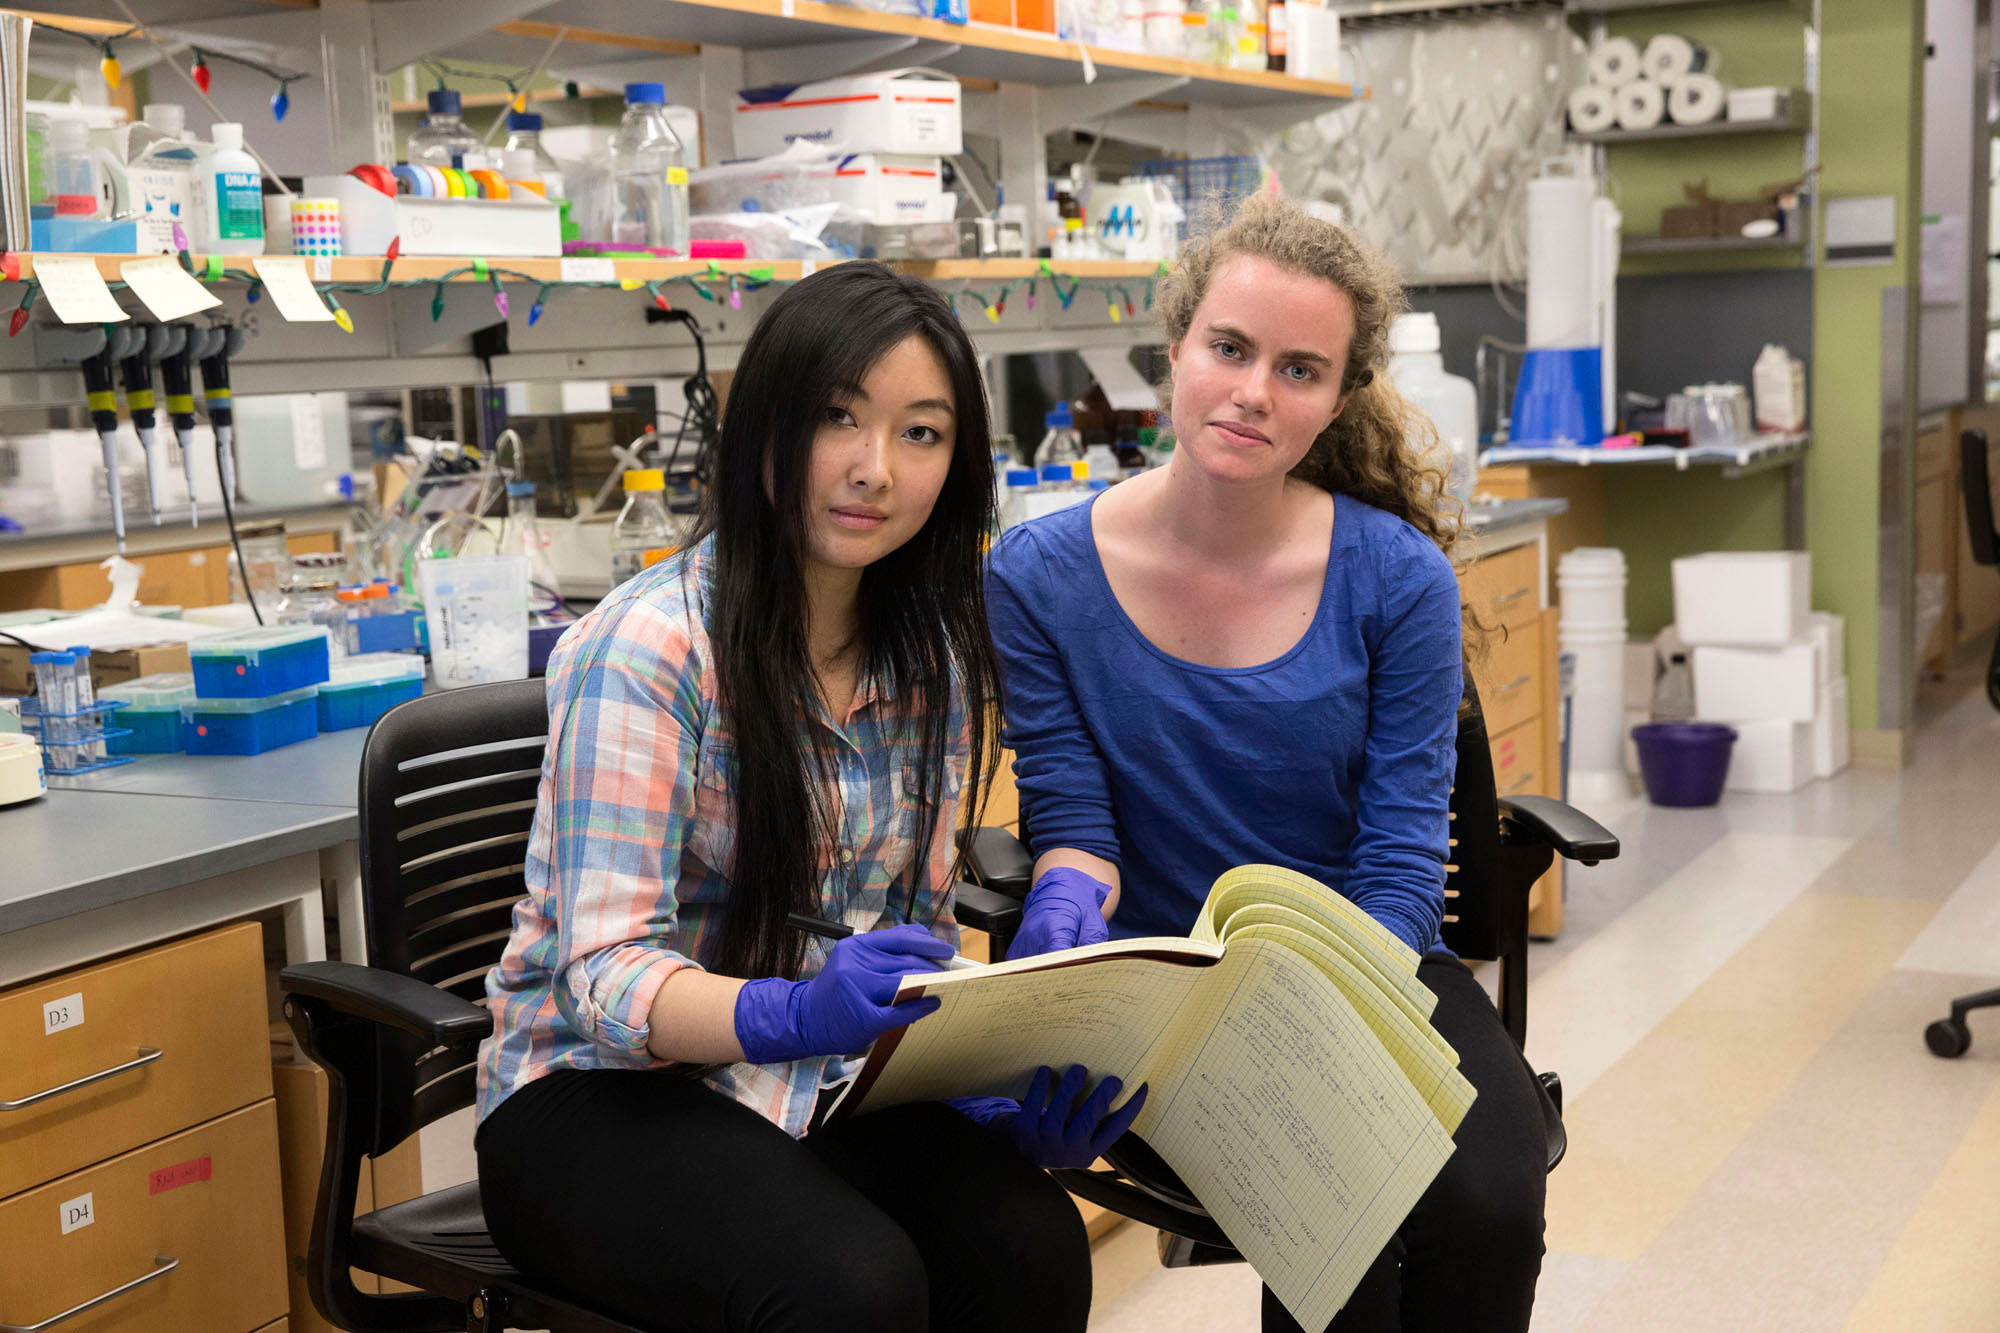 Lucy Jin, left, and Ana Untaroiu, right,  sit in two lab chairs reviewing notes